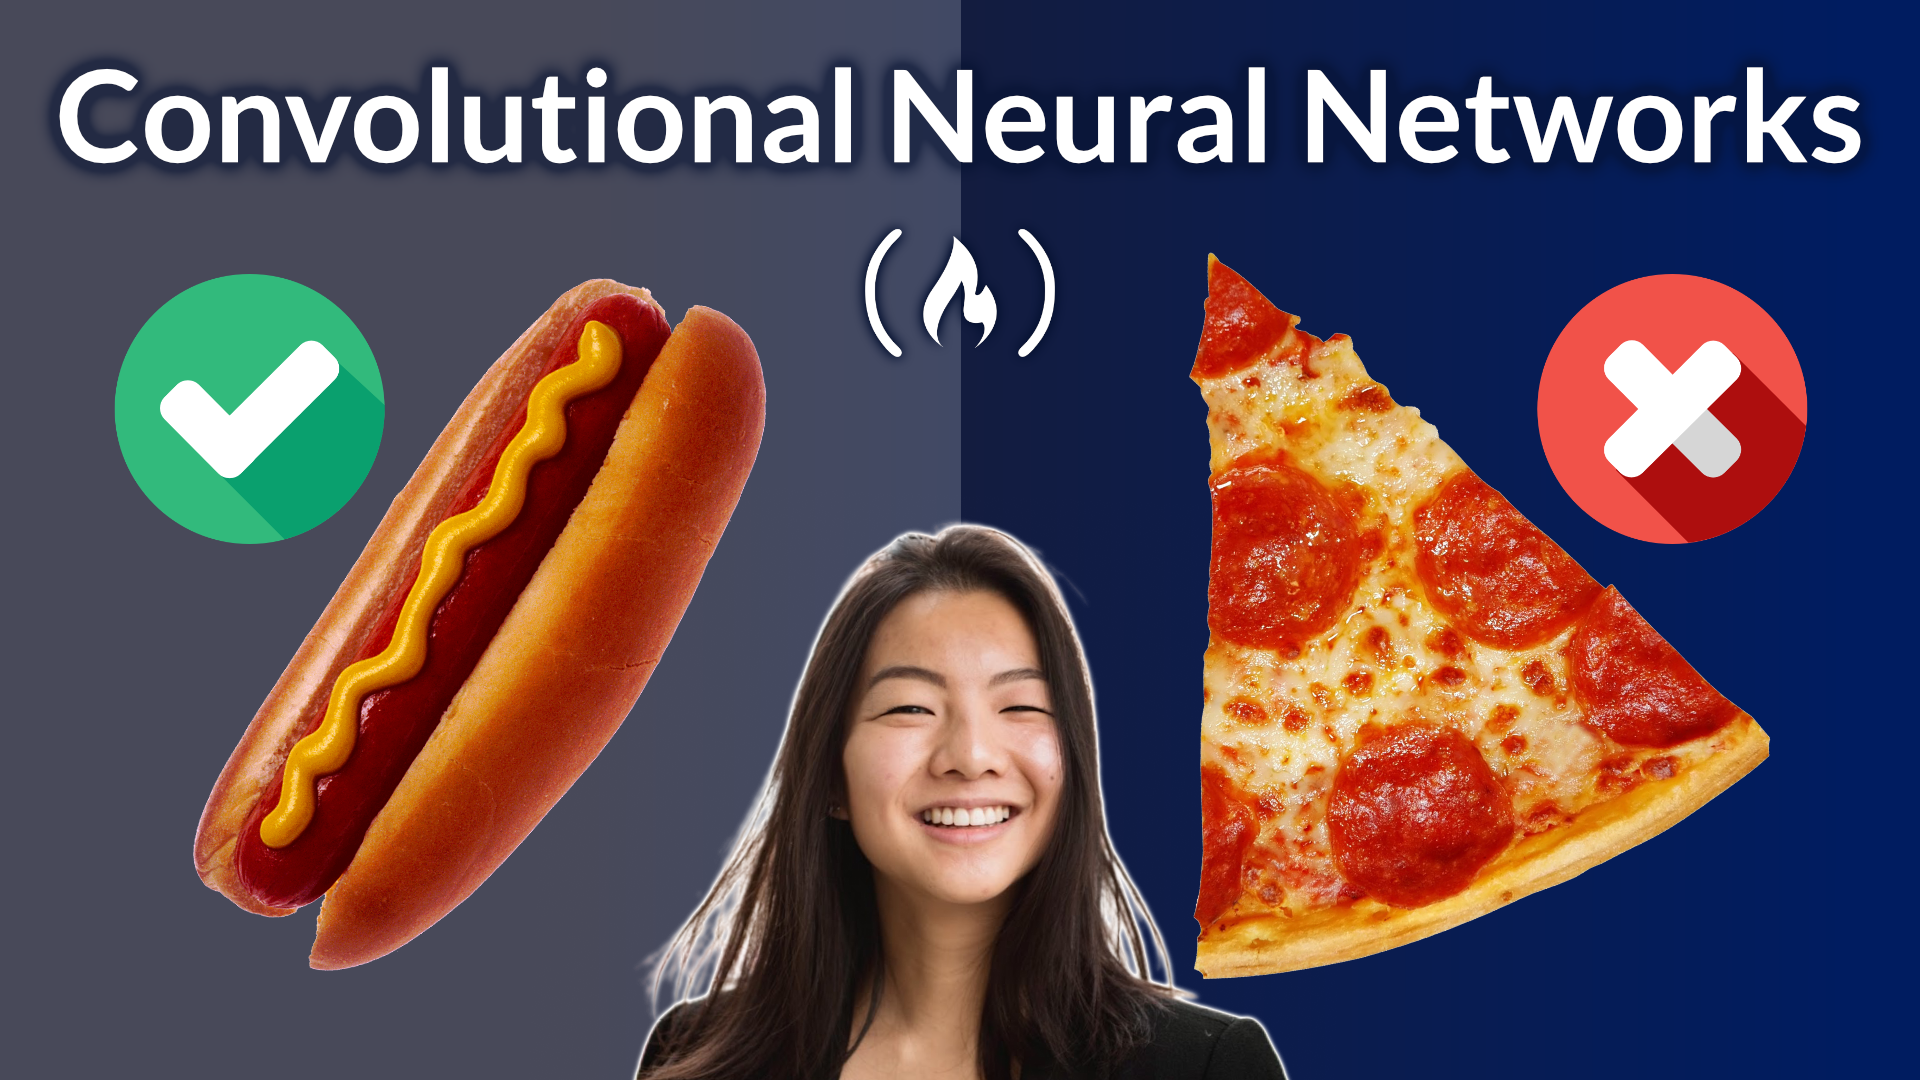 Hot dog or not hot dog? Find out with Convolutional Neural Networks